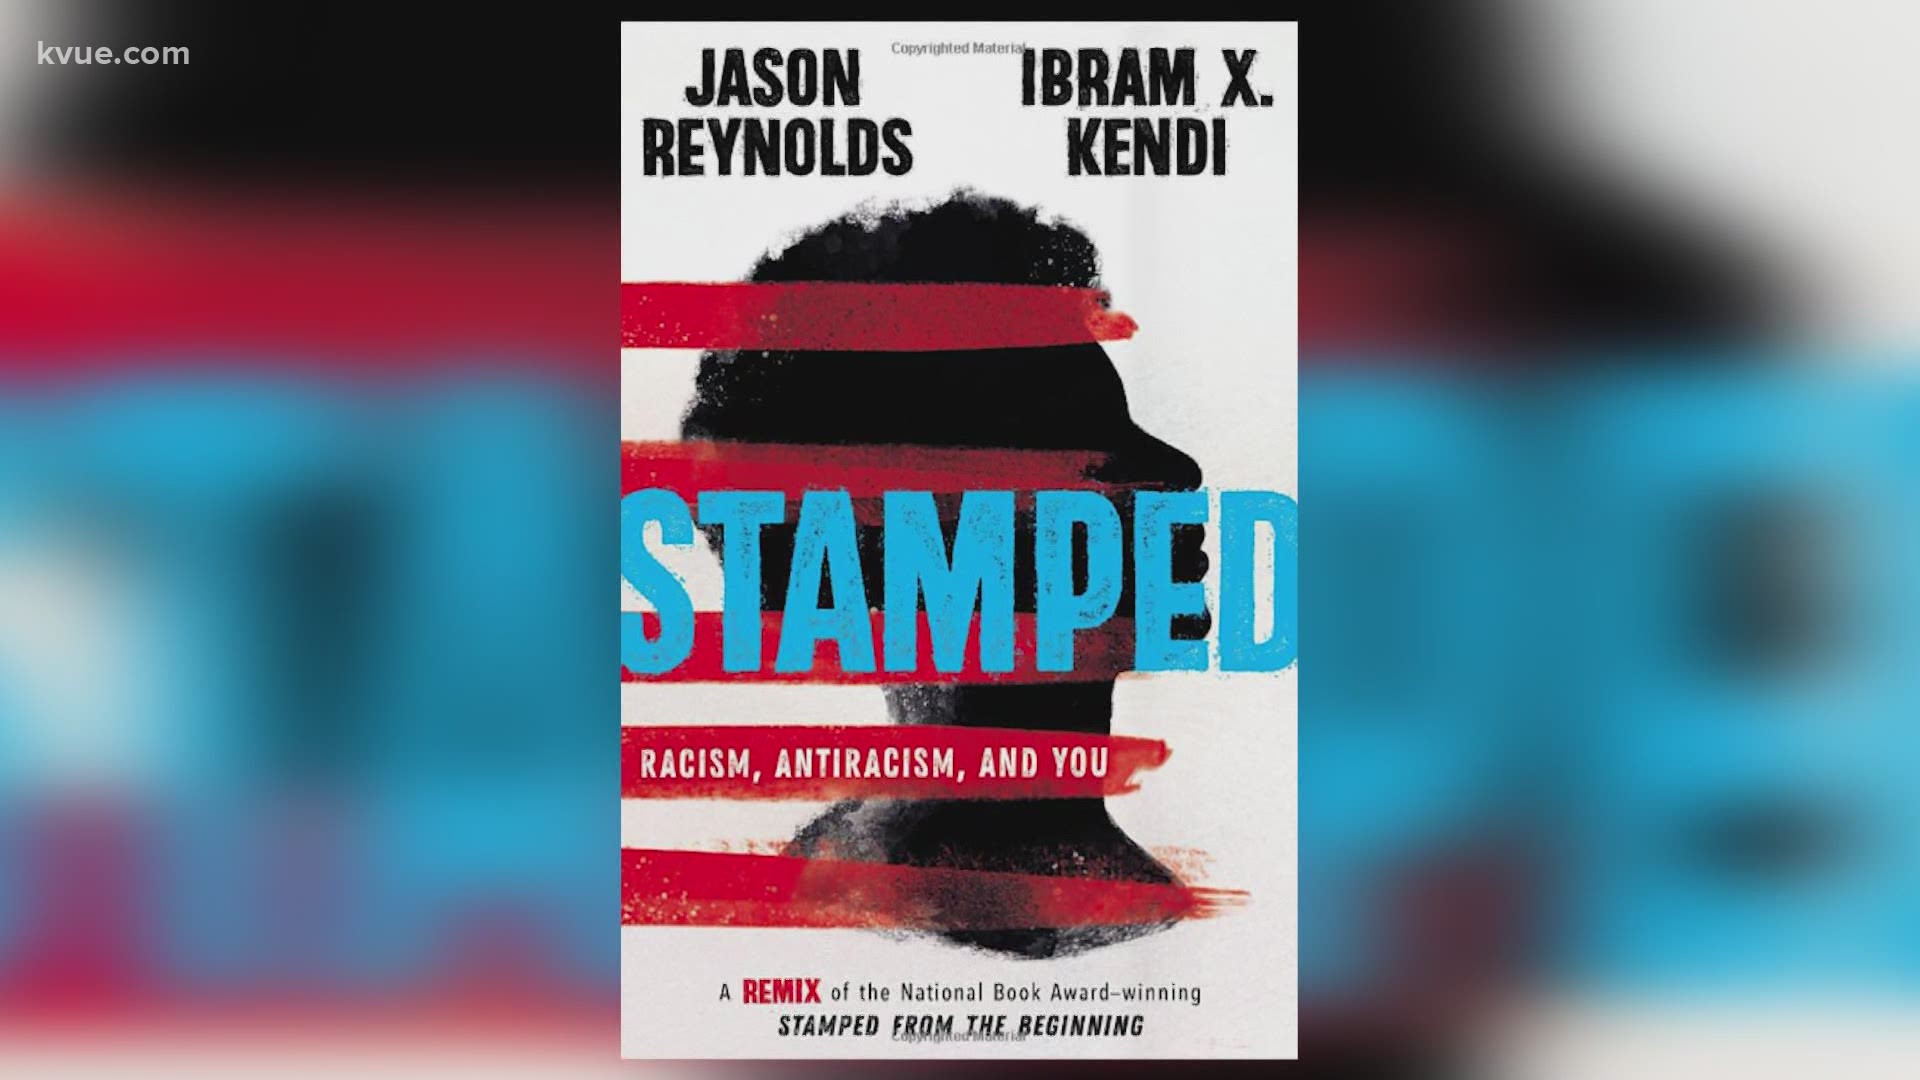 Round Rock ISD could soon take a book about racism off reading lists for middle schoolers.